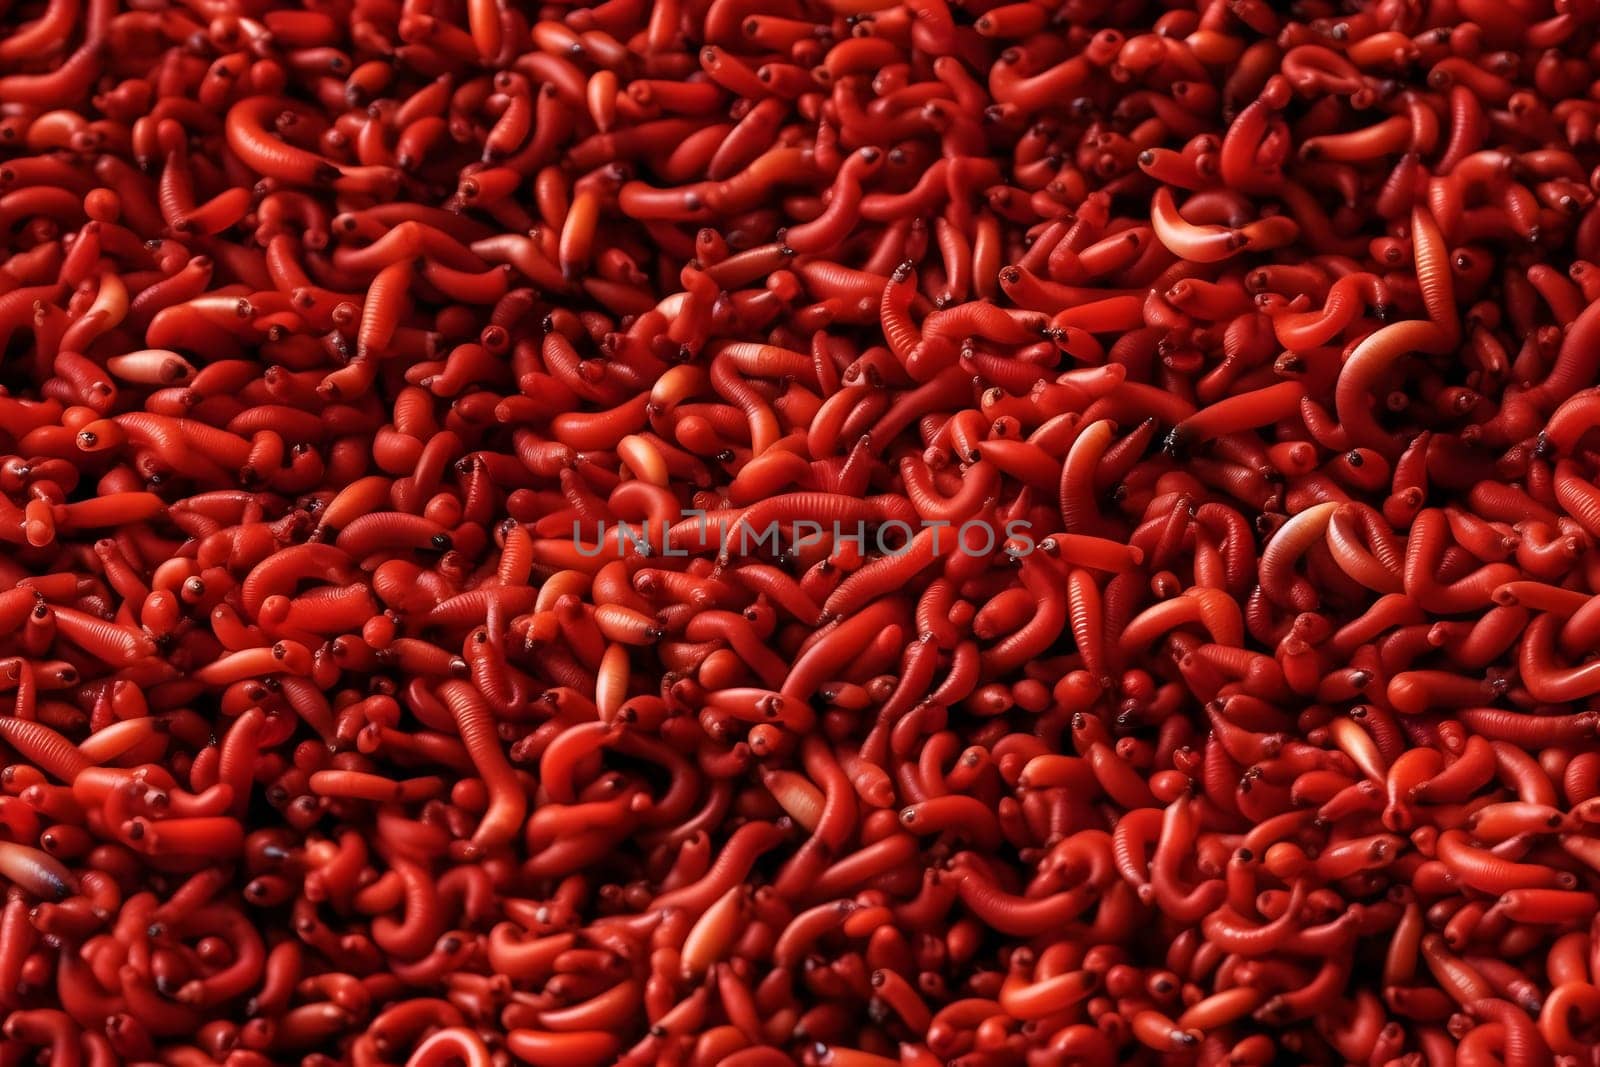 red worms full-frame background and seamless texture, neural network generated image by z1b